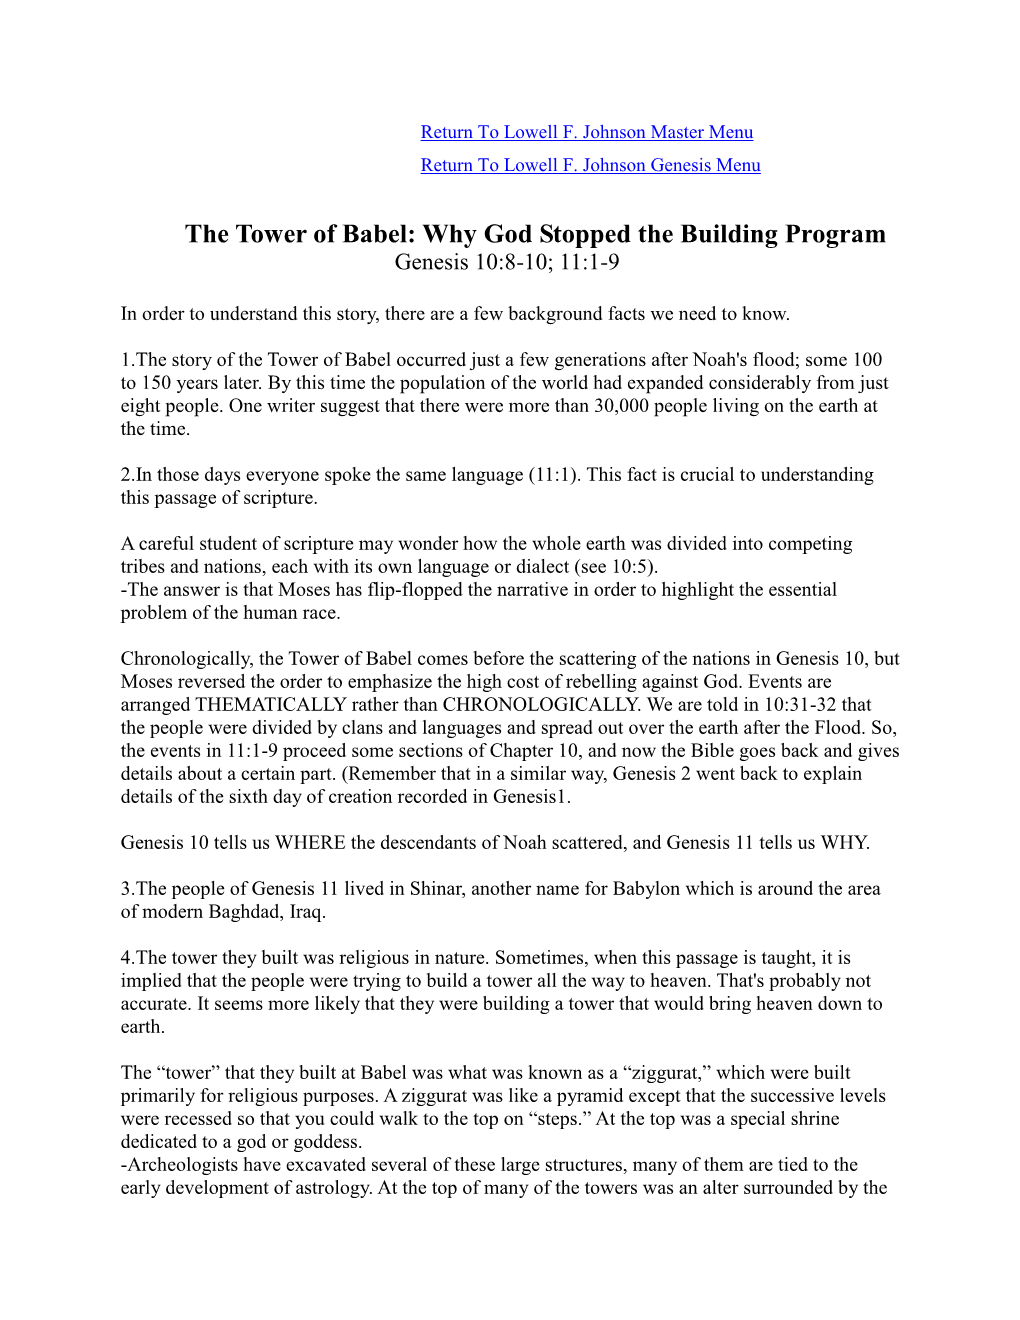 The Tower of Babel: Why God Stopped the Building Program Genesis 10:8-10; 11:1-9